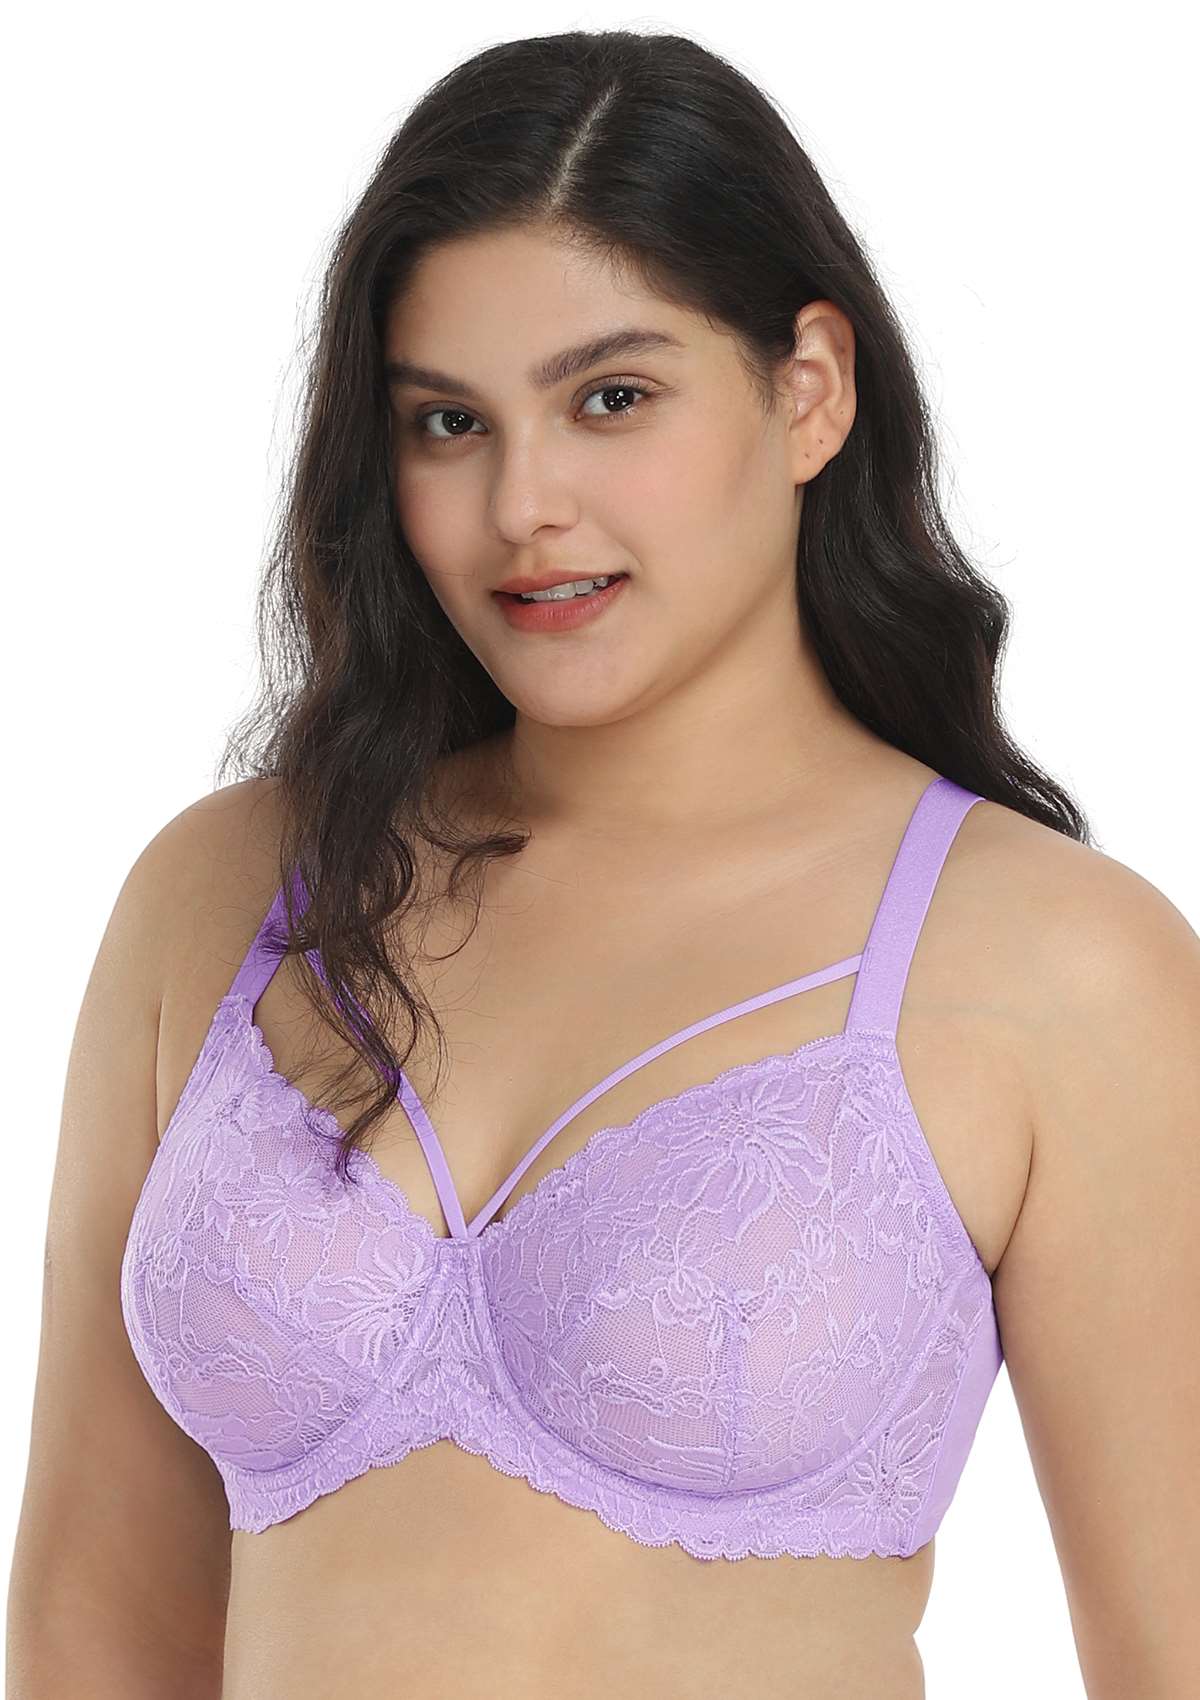 HSIA Pretty In Petals See-Through Lace Bra: Lift And Separate - Purple / 42 / C